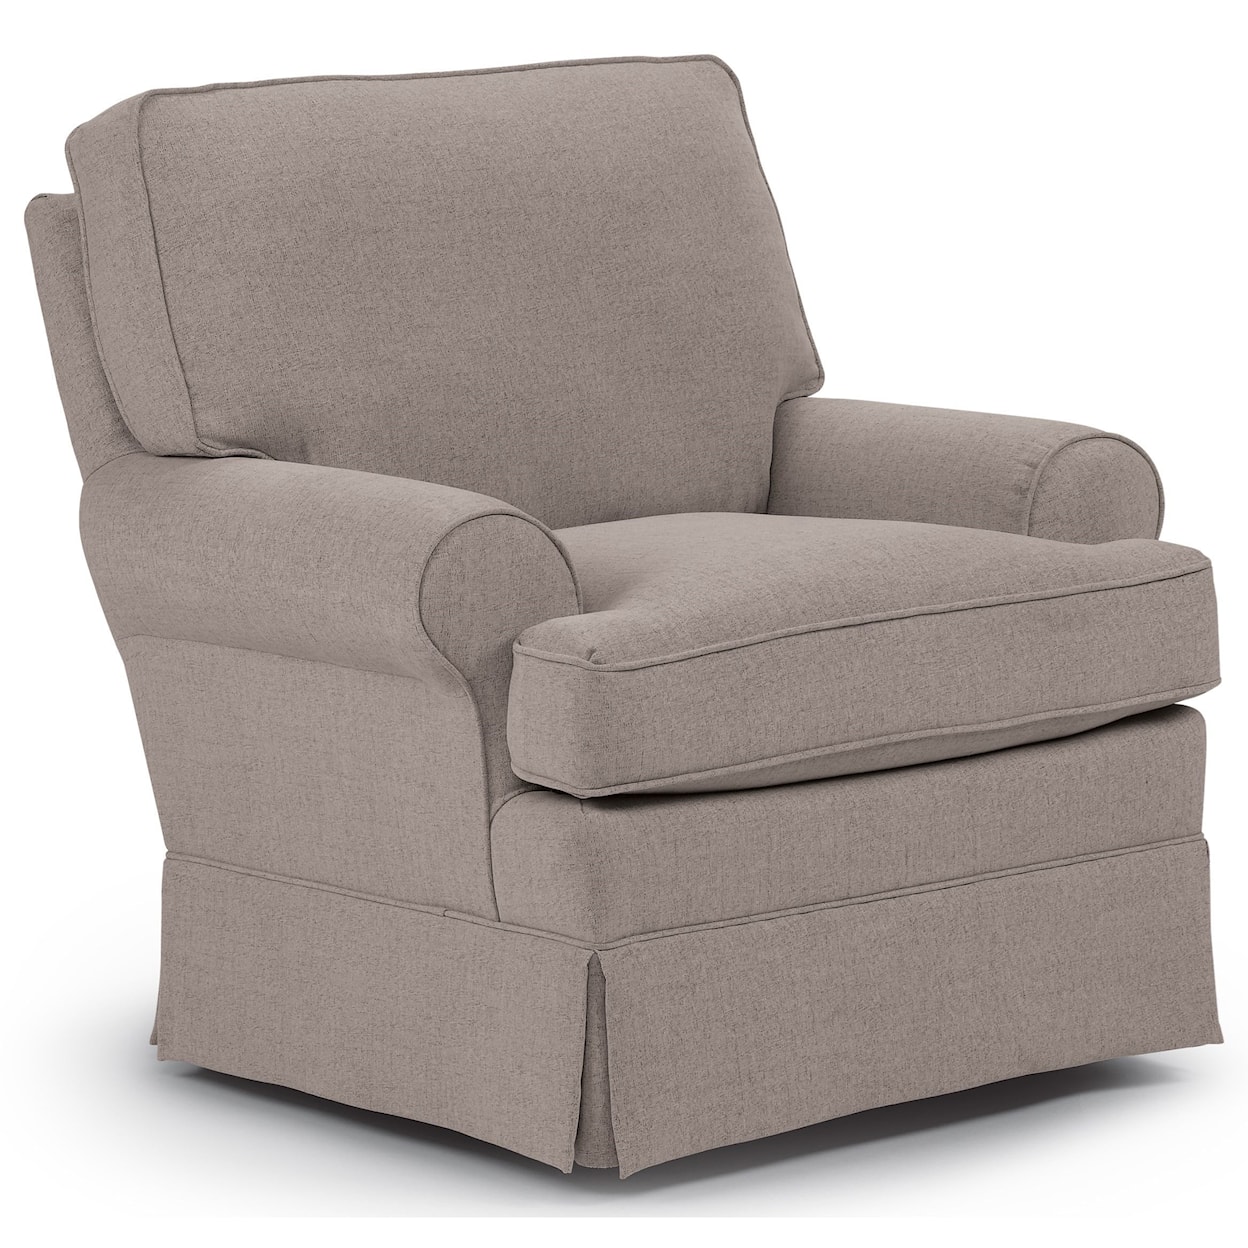 Best Home Furnishings Quinn Swivel Glider Chair without Welt Cord Trim